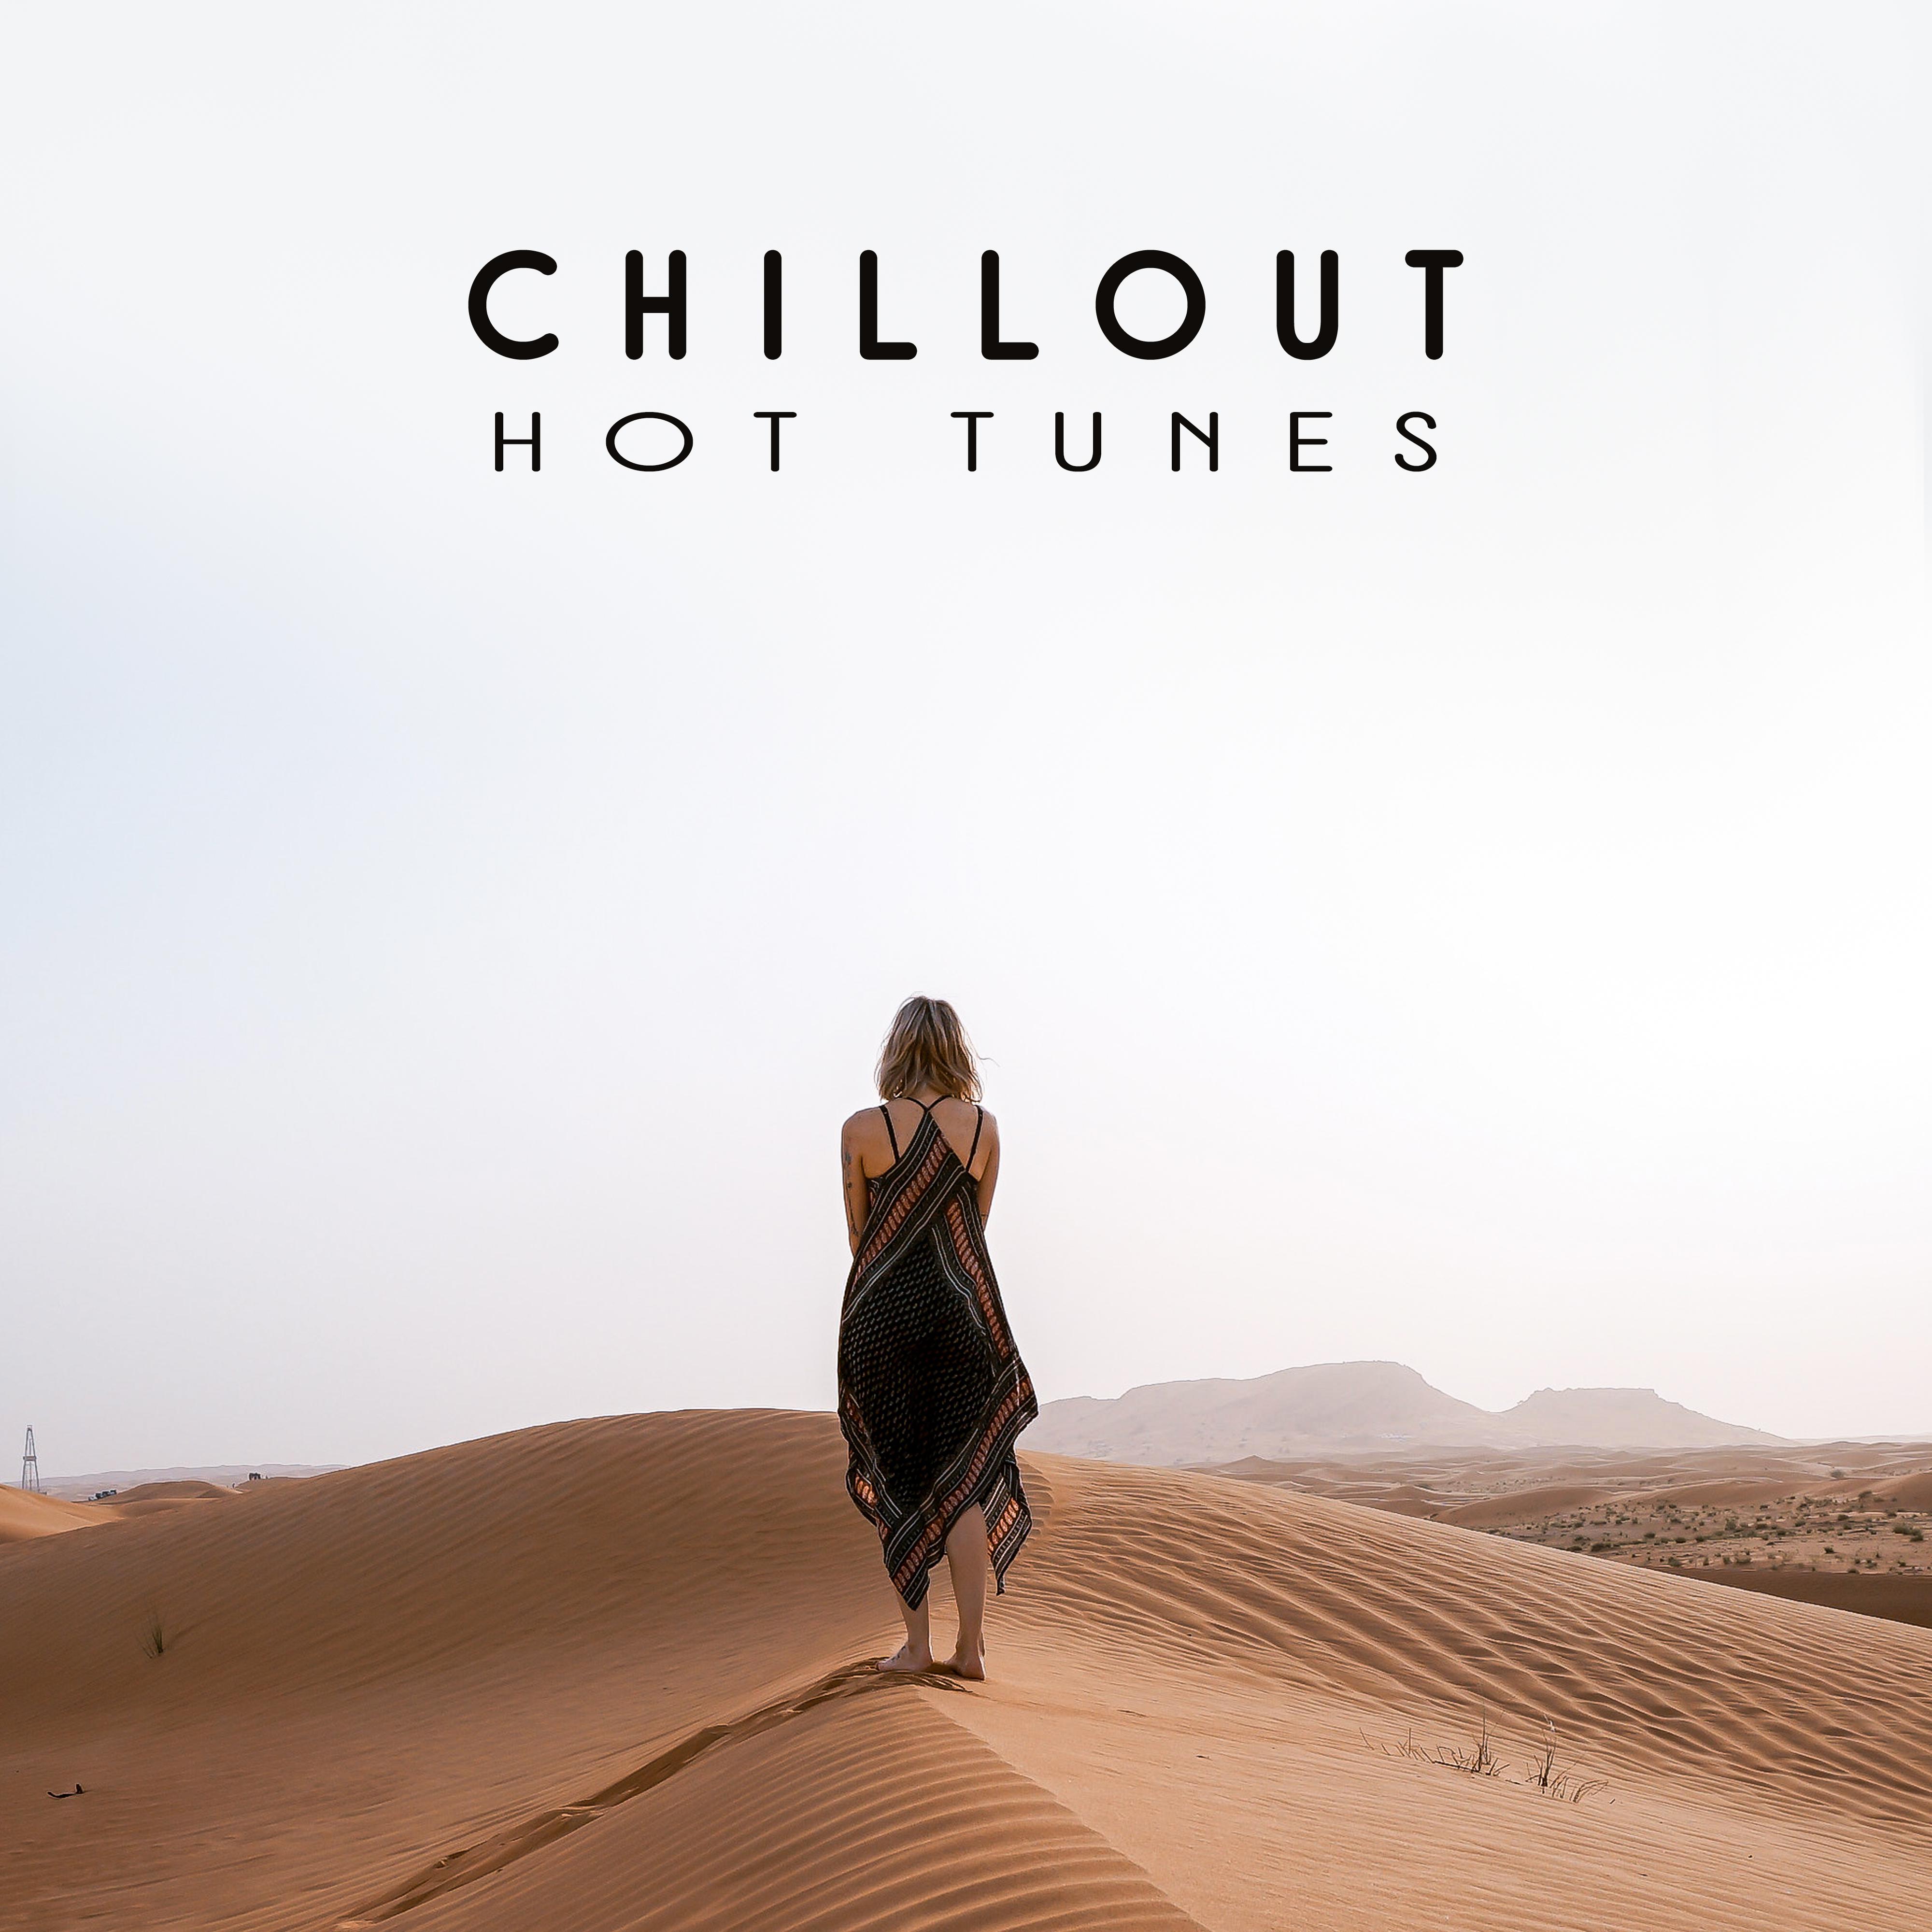 Chillout Hot Tunes – Hot Beats, Chill Out Music, Lounge, Relax, Chill Out 2017